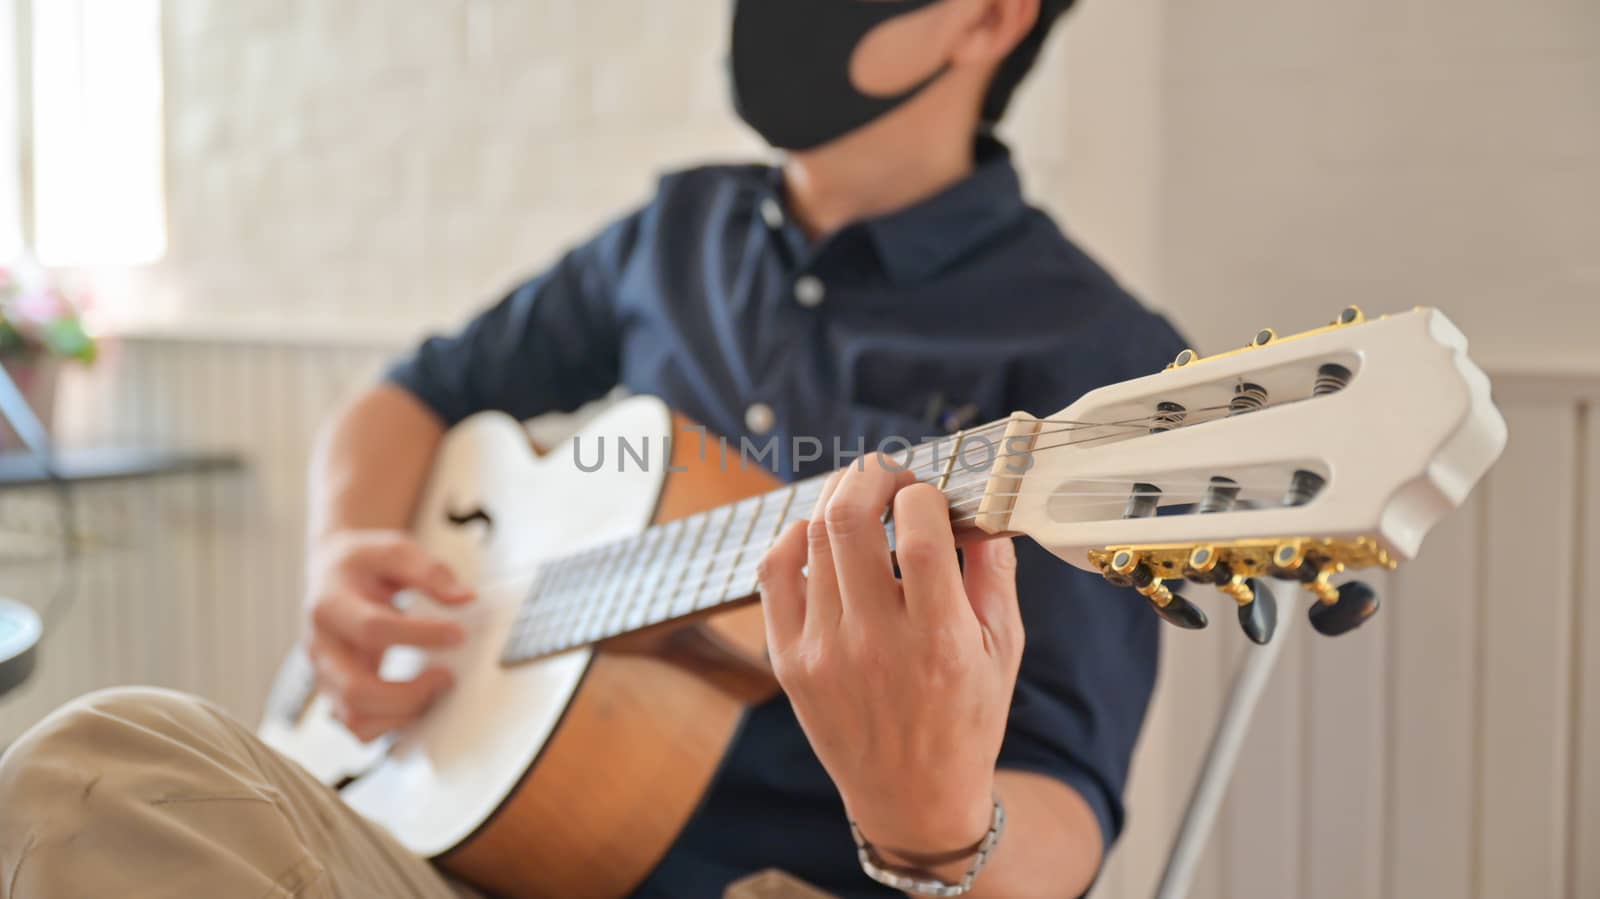 A young man wearing a mask playing guitar at home,Stay at home,W by poungsaed